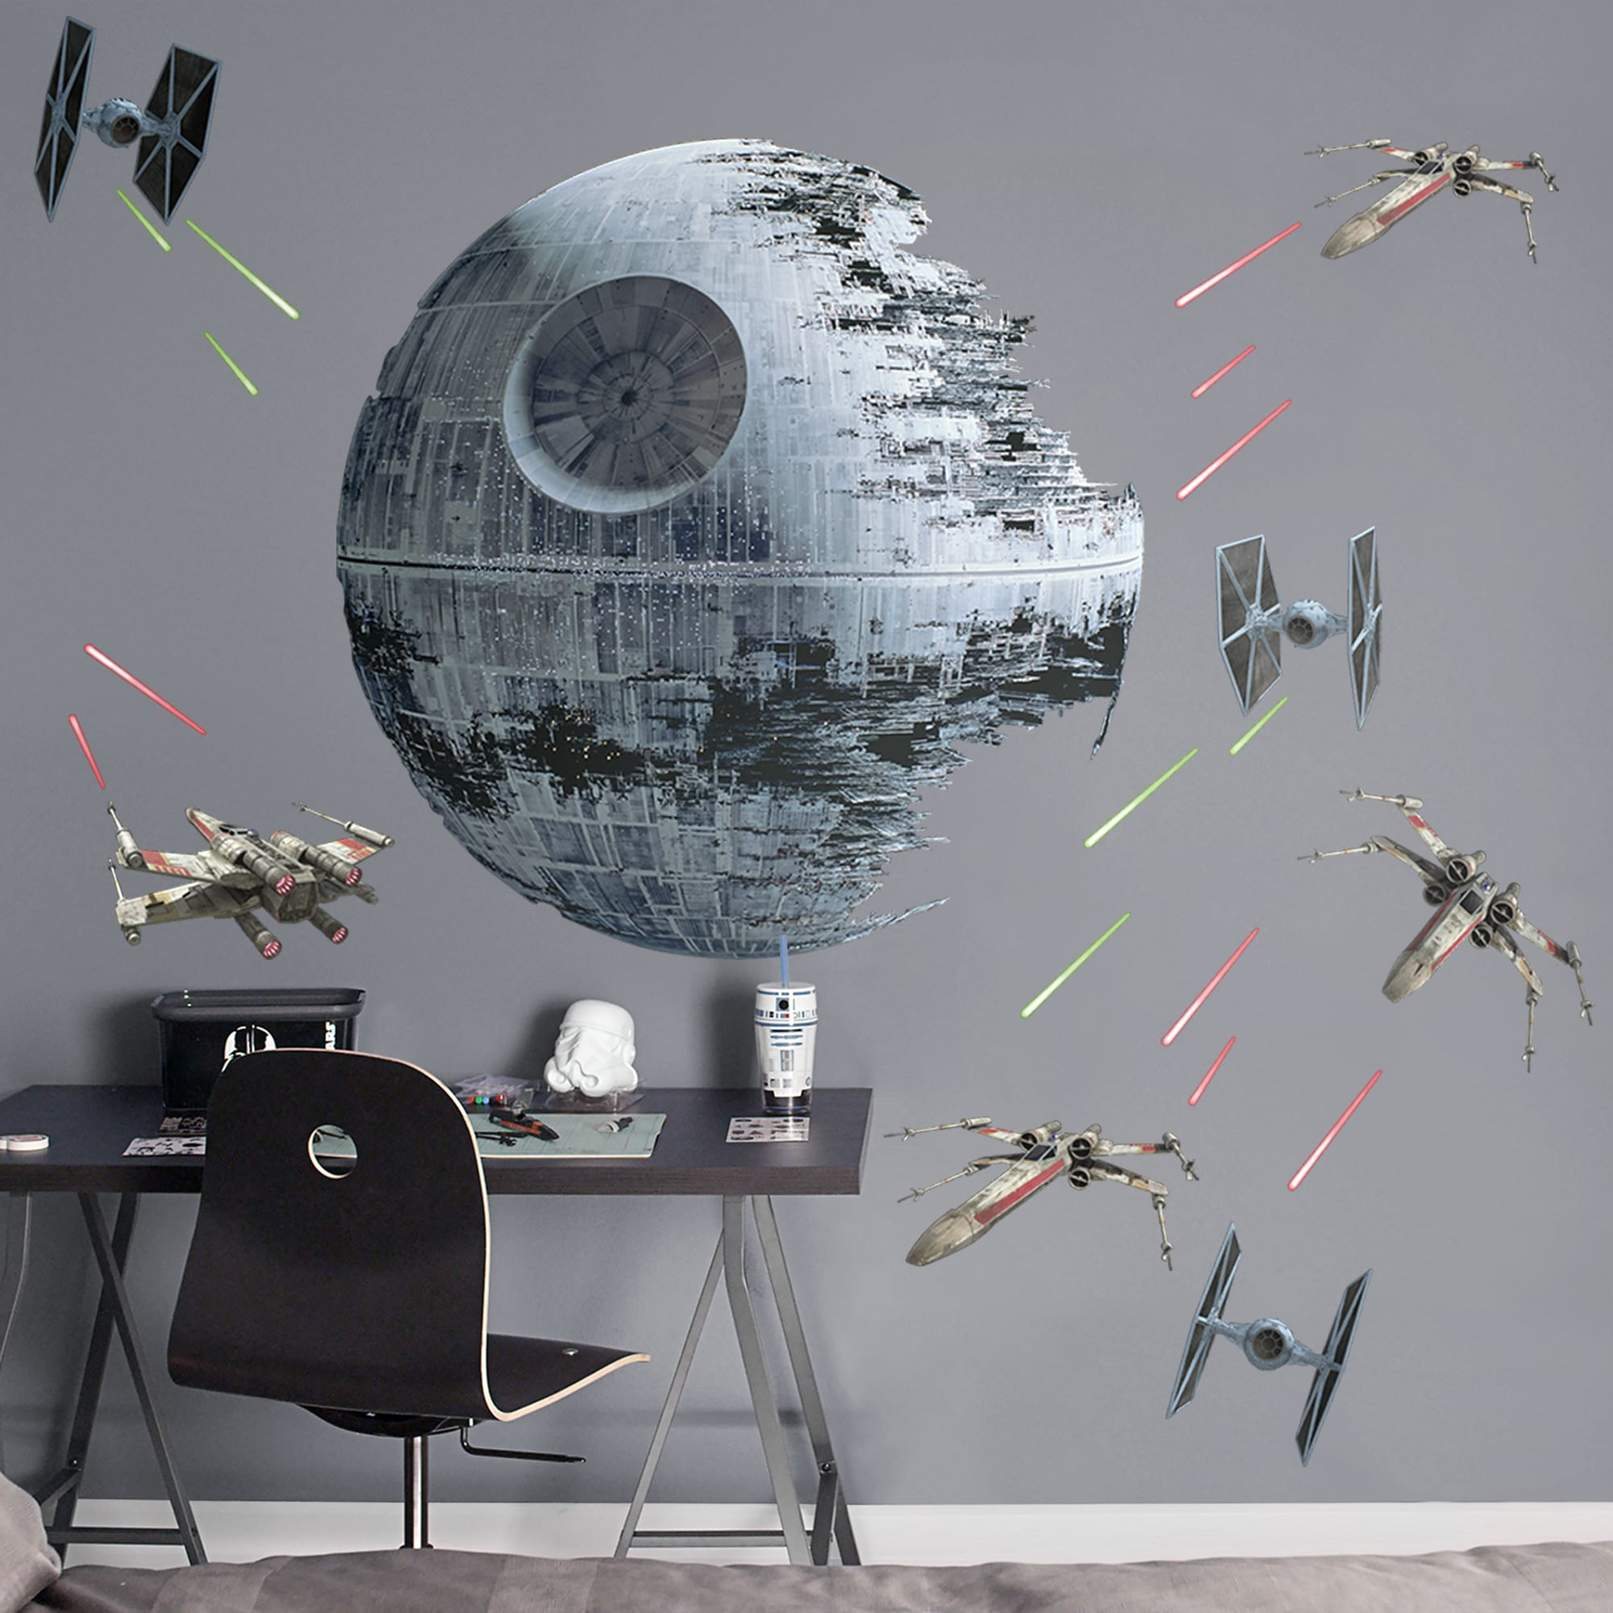 https://fathead.com/collections/star-wars/products/92-92162